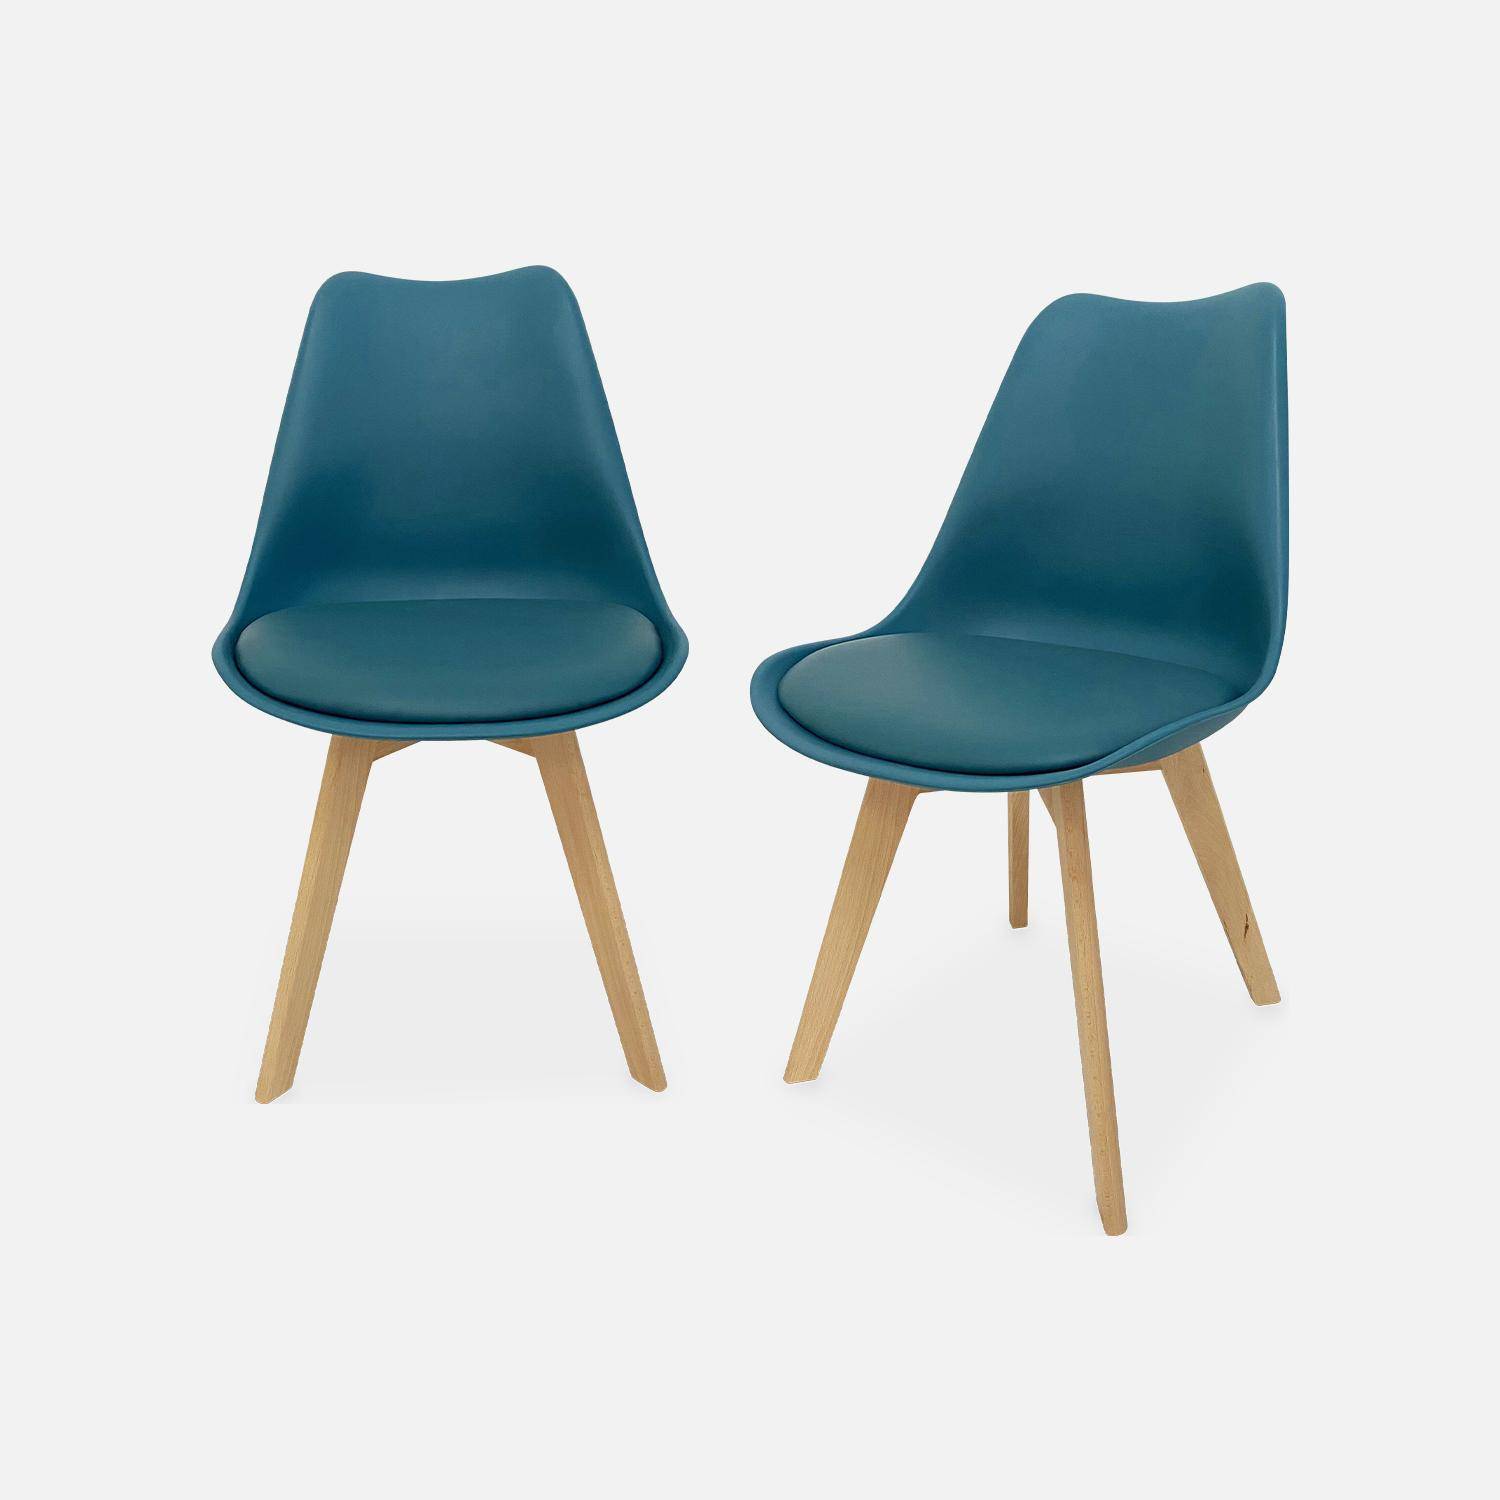 Pair of scandi-style faux-leather dining chair, blue, L49 x D55 x H81cm, NILS Photo1